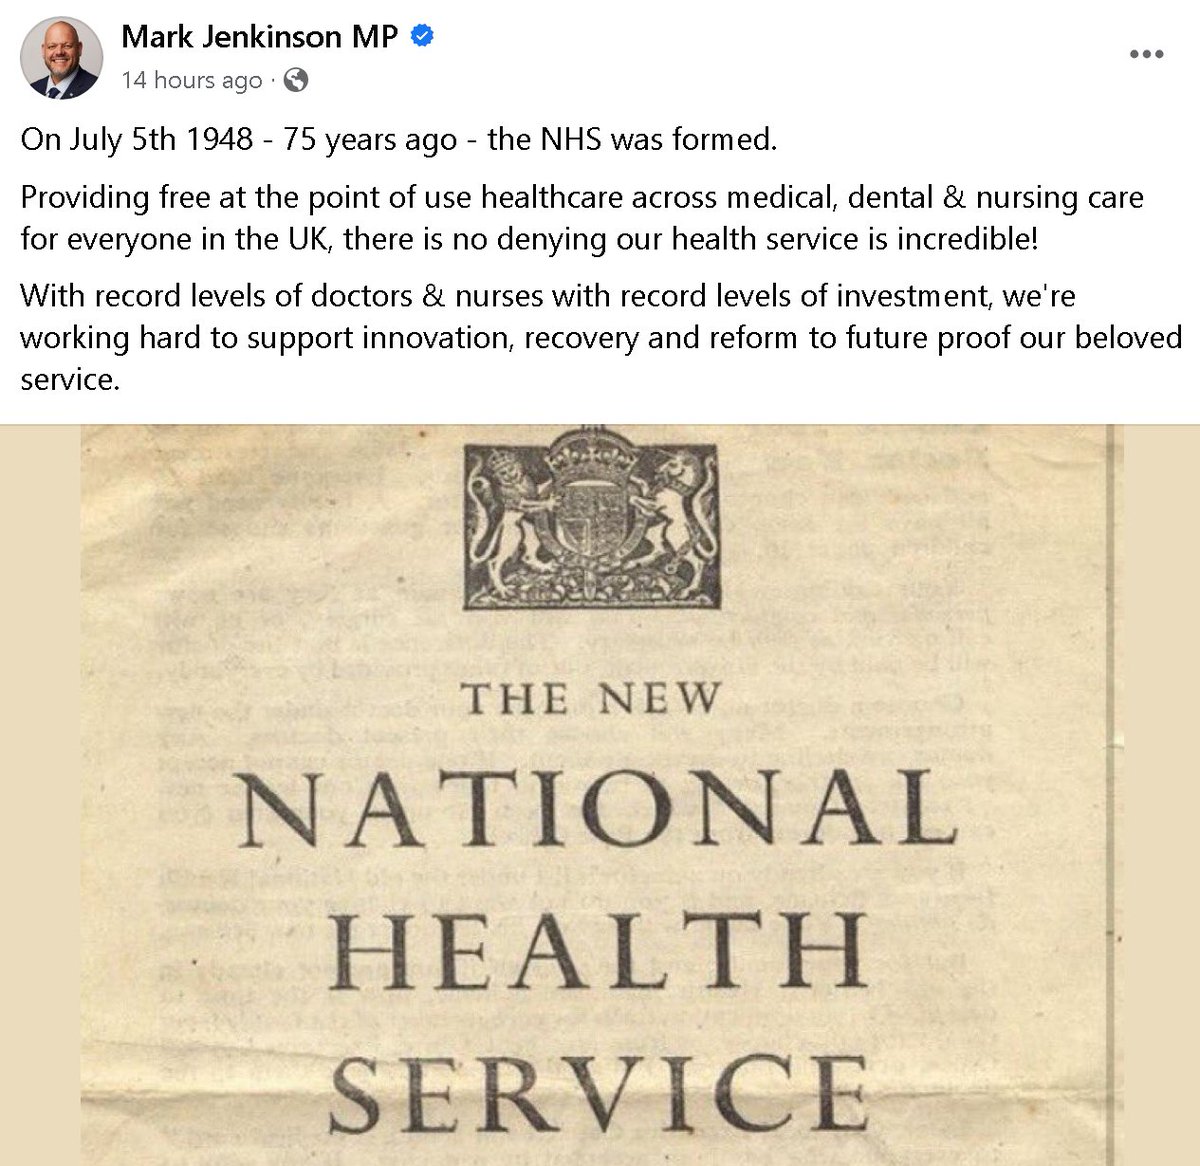 Vomit-inducing hypocrisy from this UKIP reject with a 10% majority.
Only the fiddled boundary changes can save him now.
#ToriesOut364 #MarkJenkinson #NHS75 #SaveOurNHS #ToriesDestroyingOurNHS